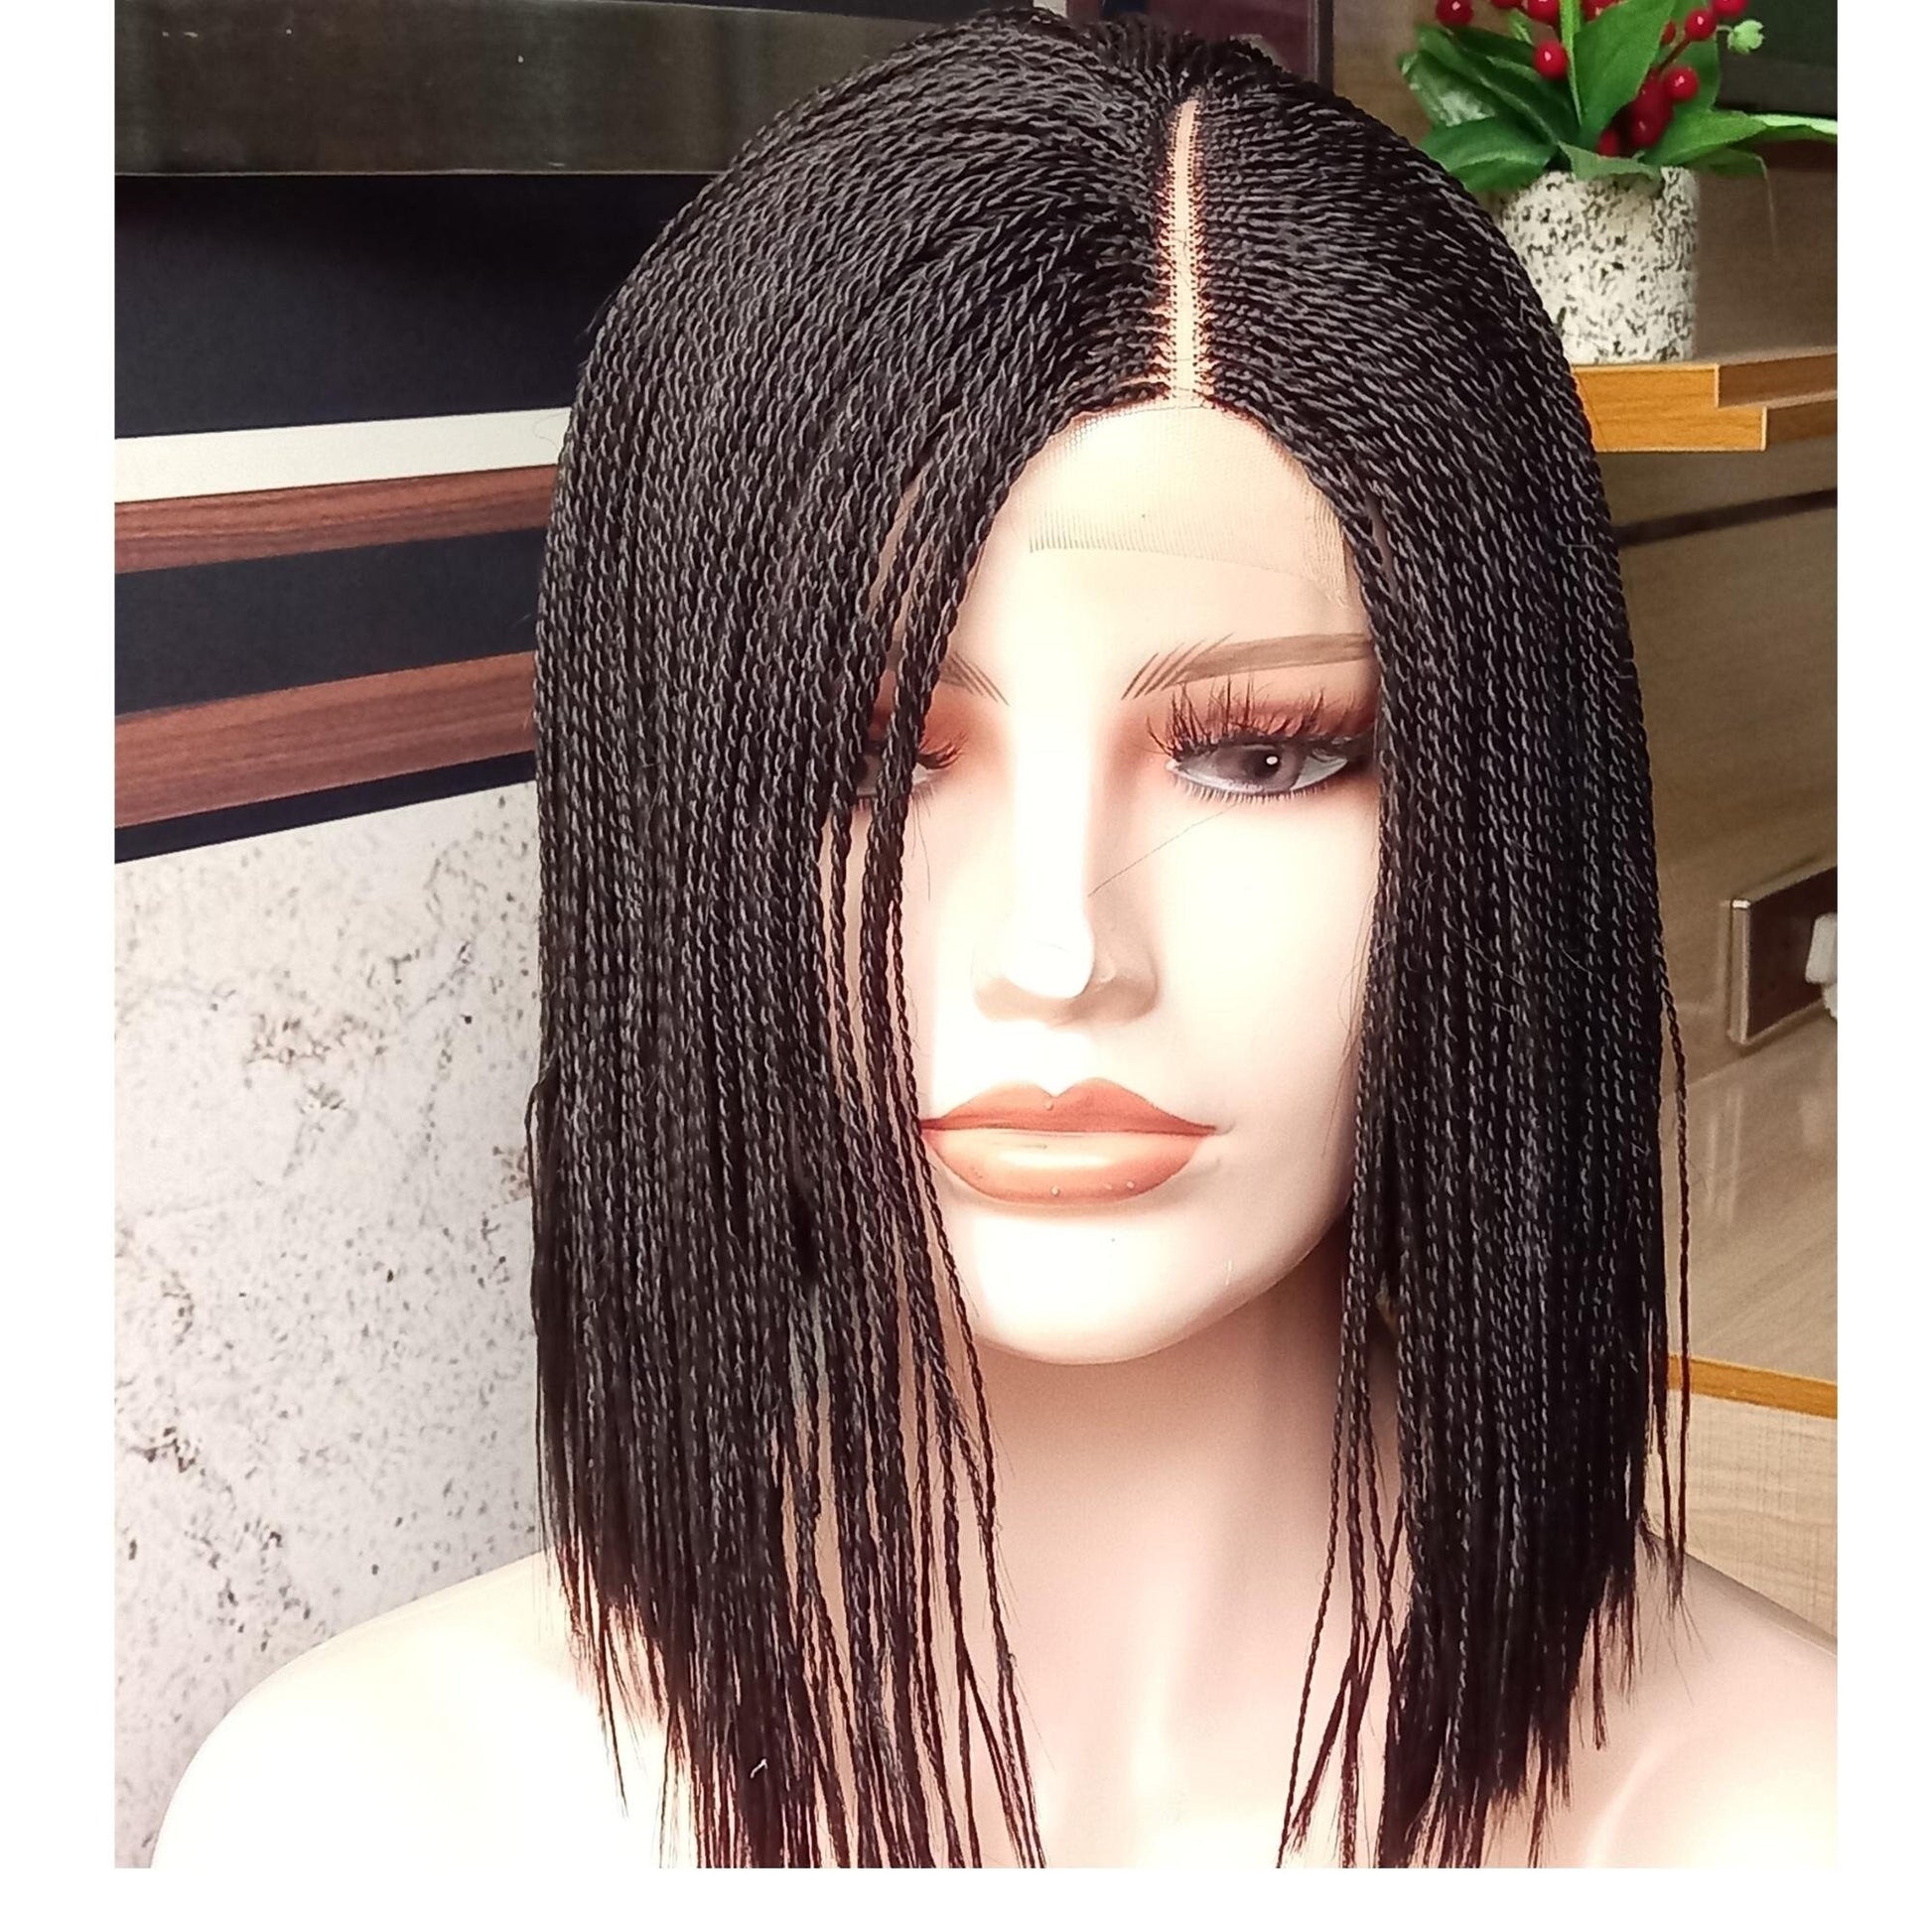 2 in 1 Pack of Braided Lace Front Wig Knotless Braids Box Braid Wig Micro Braid wig Synthetic braided wigs for Black Women - BRAIDED WIG BOSS